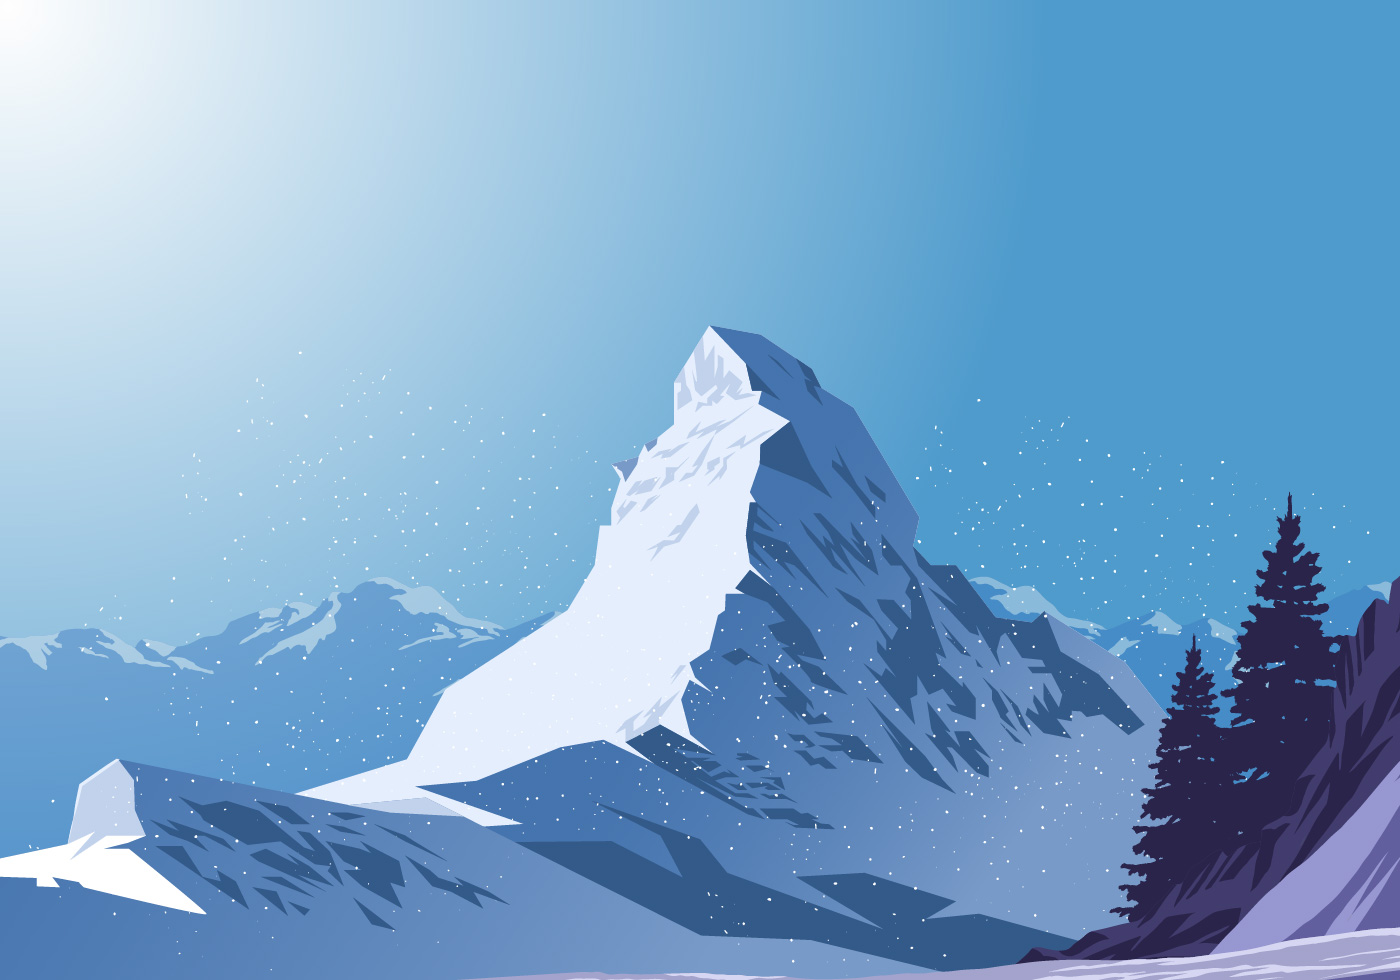 Browse 106 incredible Swiss Mountain vectors, icons, clipart graphics, and ...